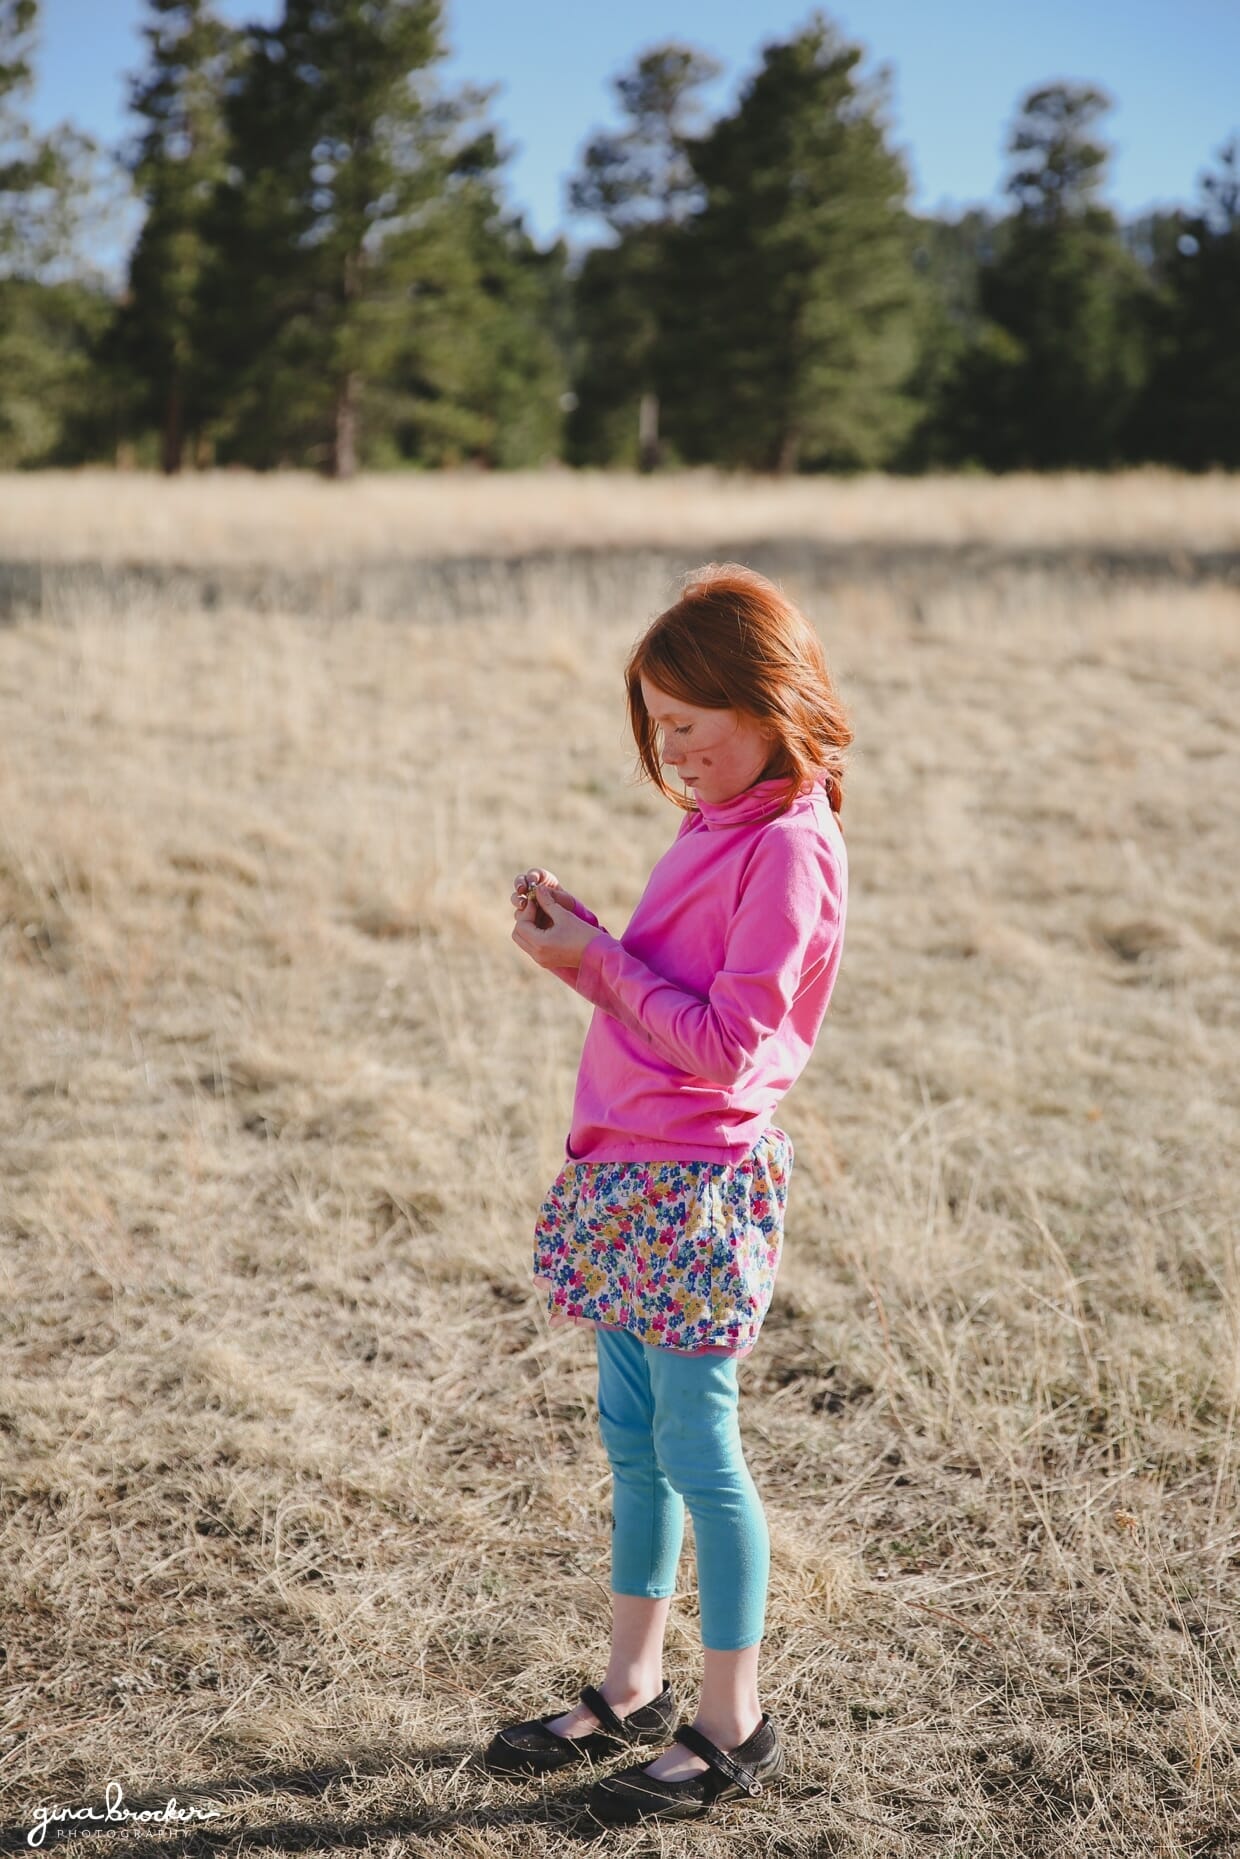 A young girl looks at a flower in her hand while standing in a field